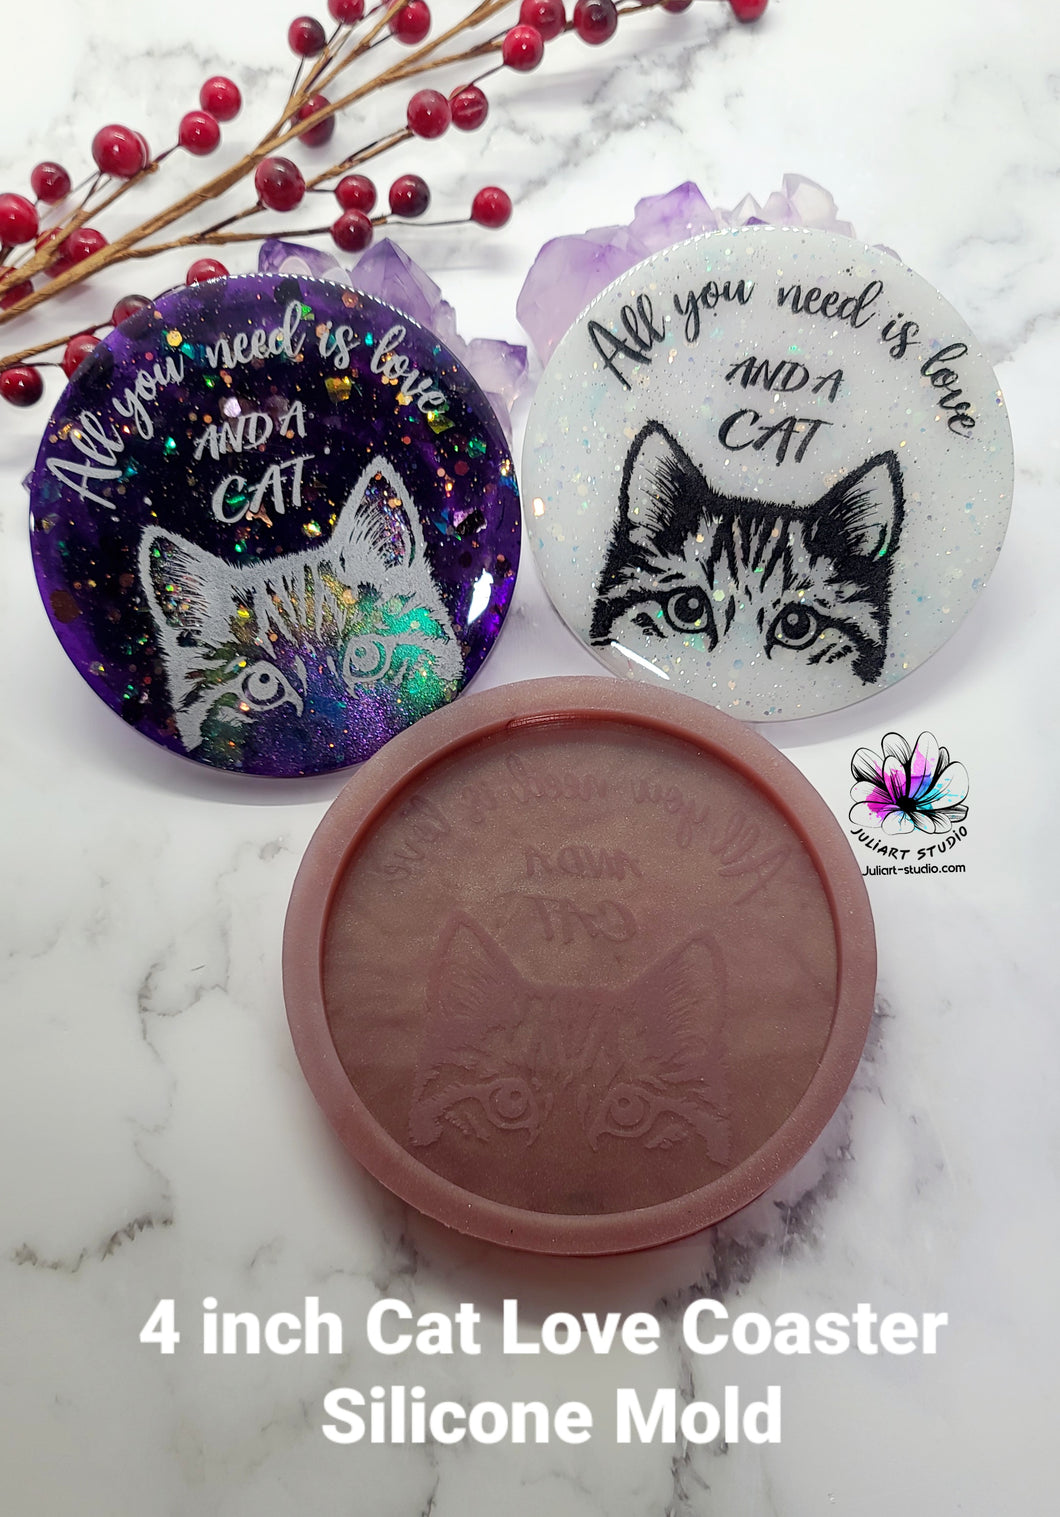 4 inch Cat Love Coaster Silicone Mold for Resin casting